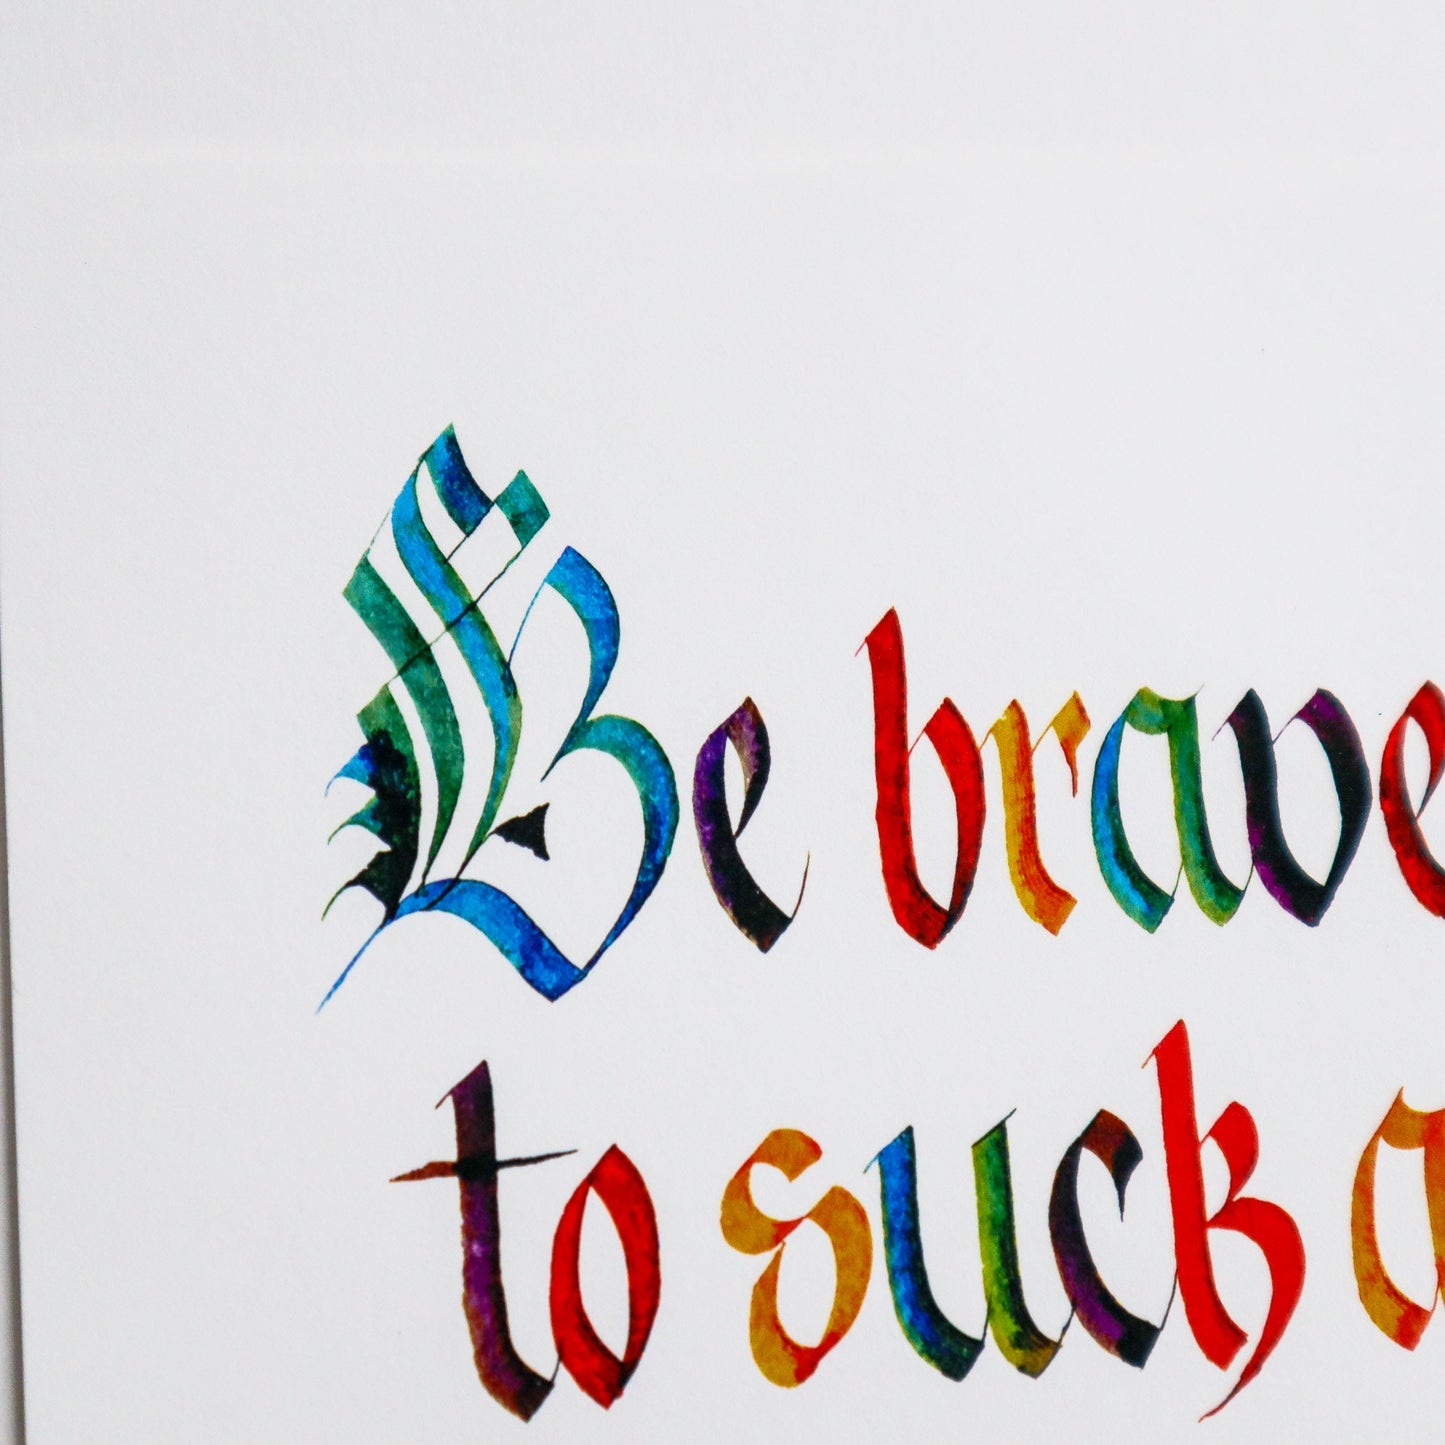 Be Brave Enough to Suck wall print